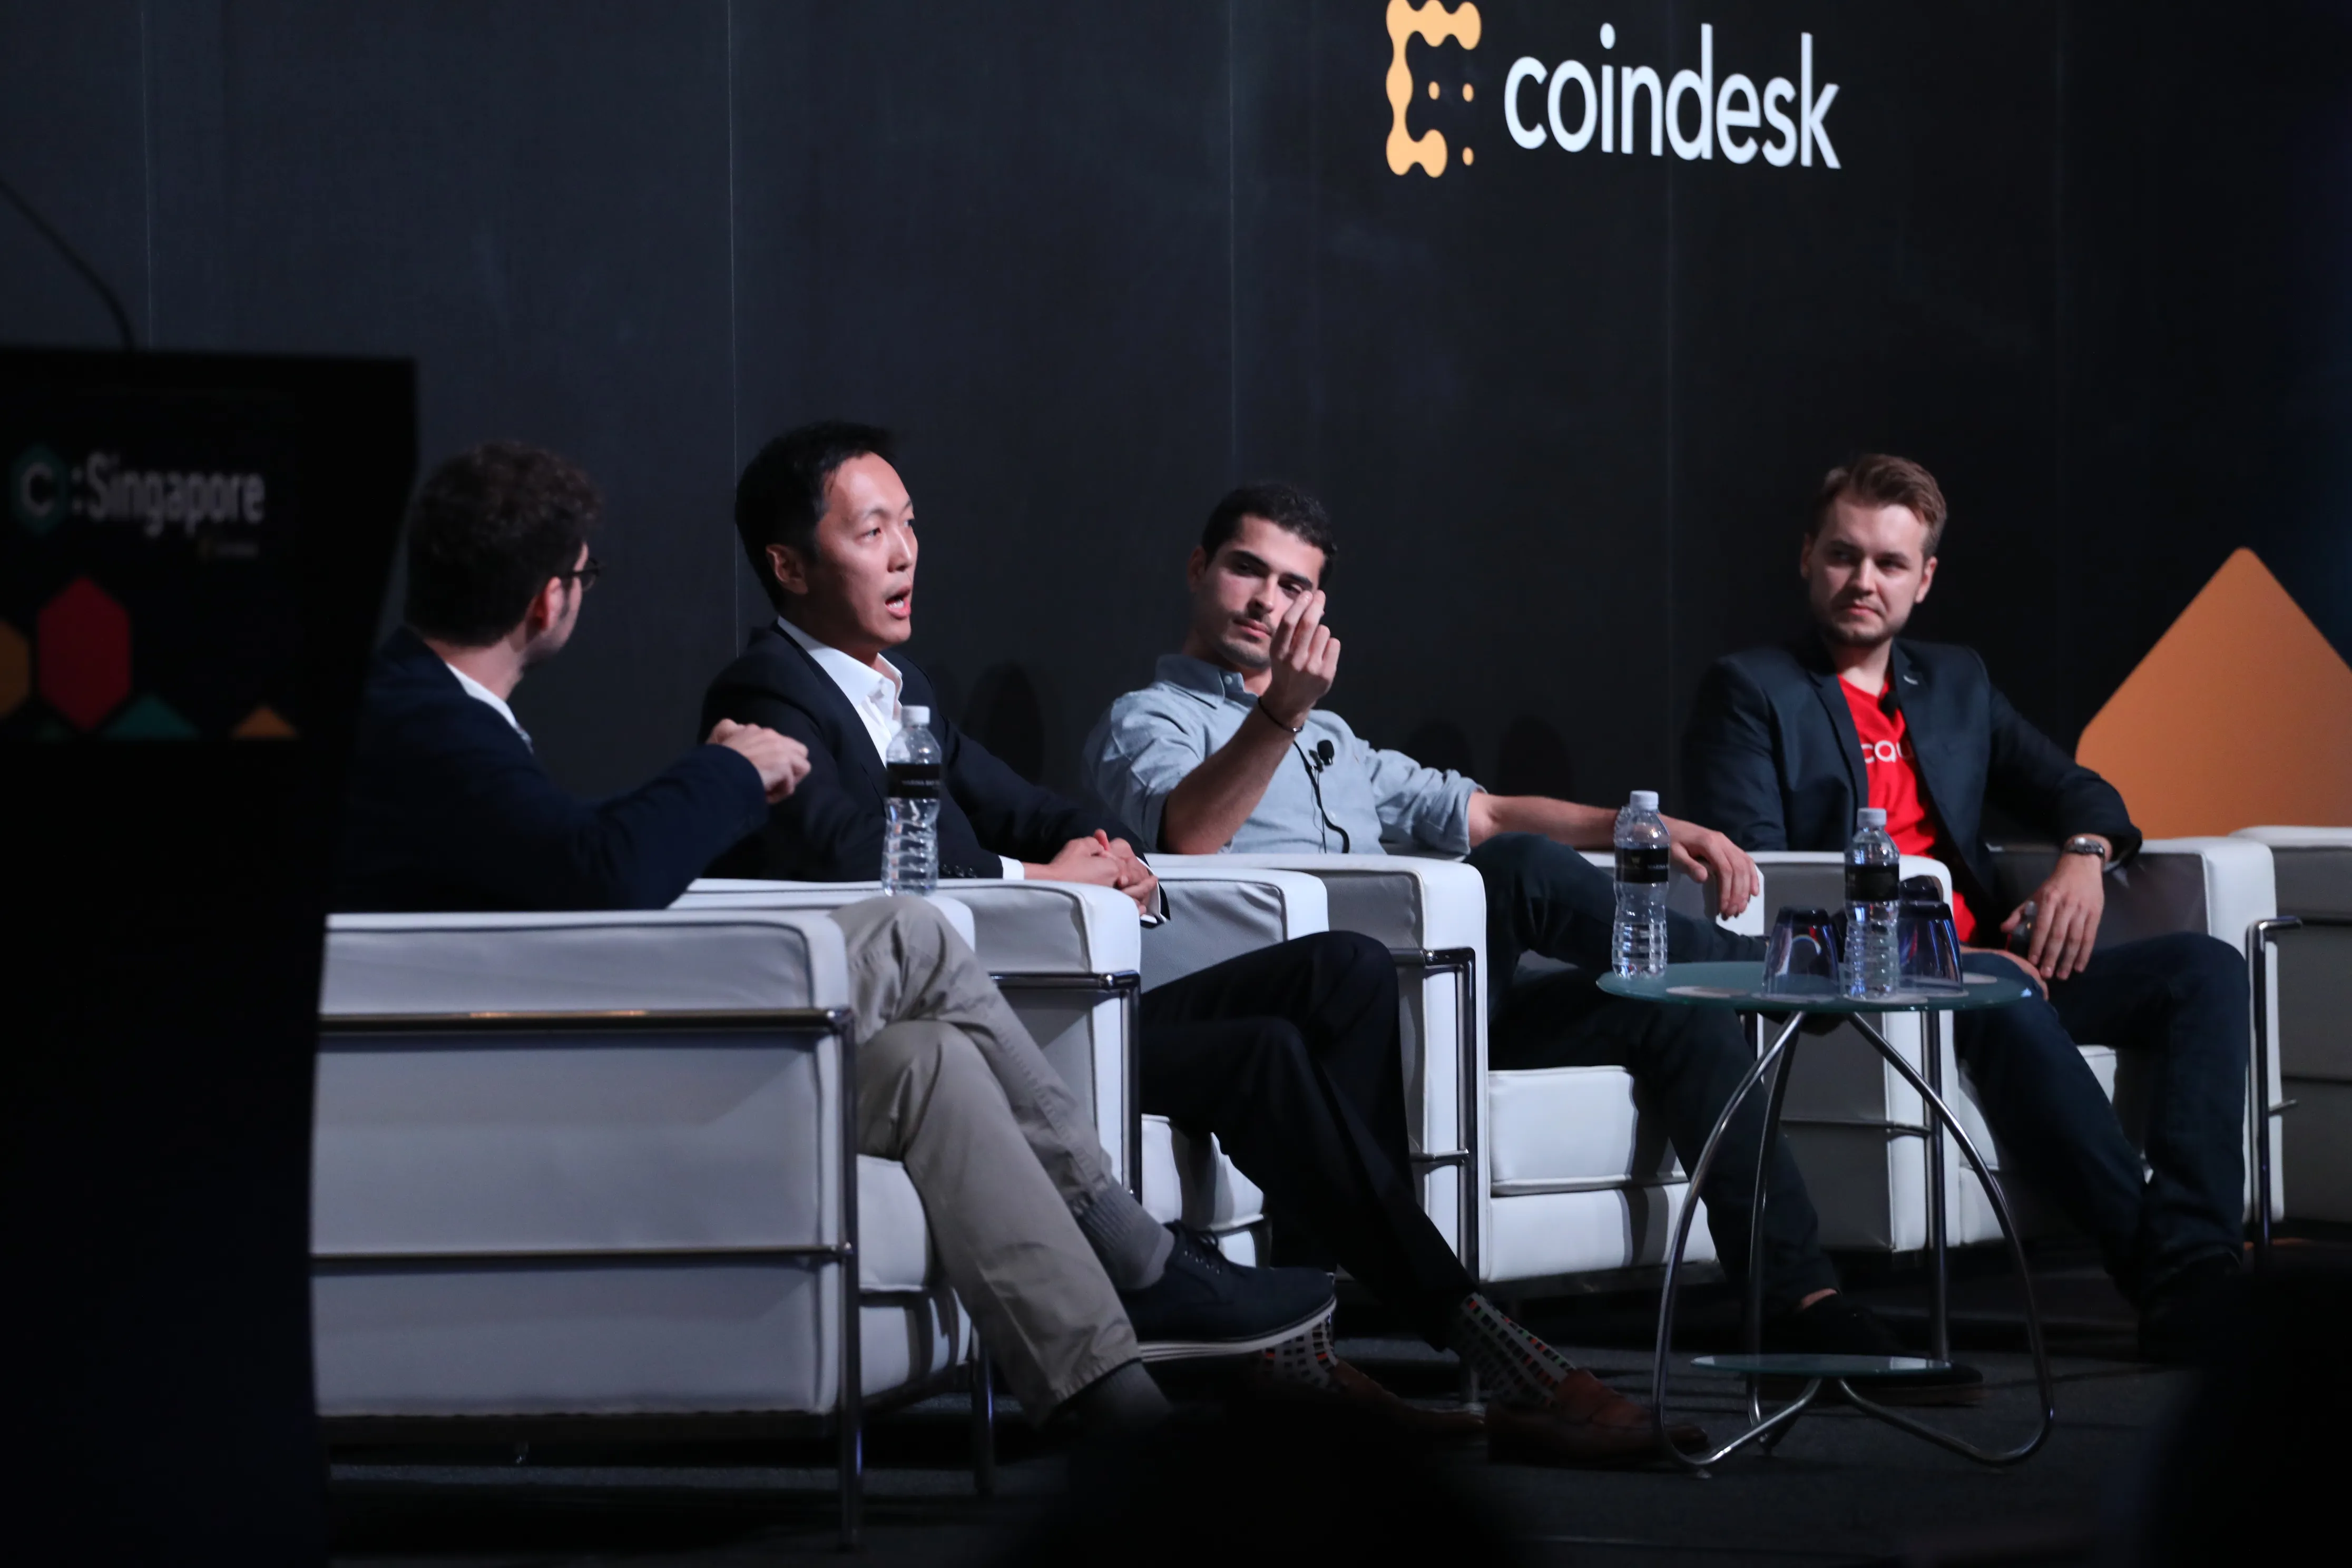 Singapore coindesk conference with people talking on the stage